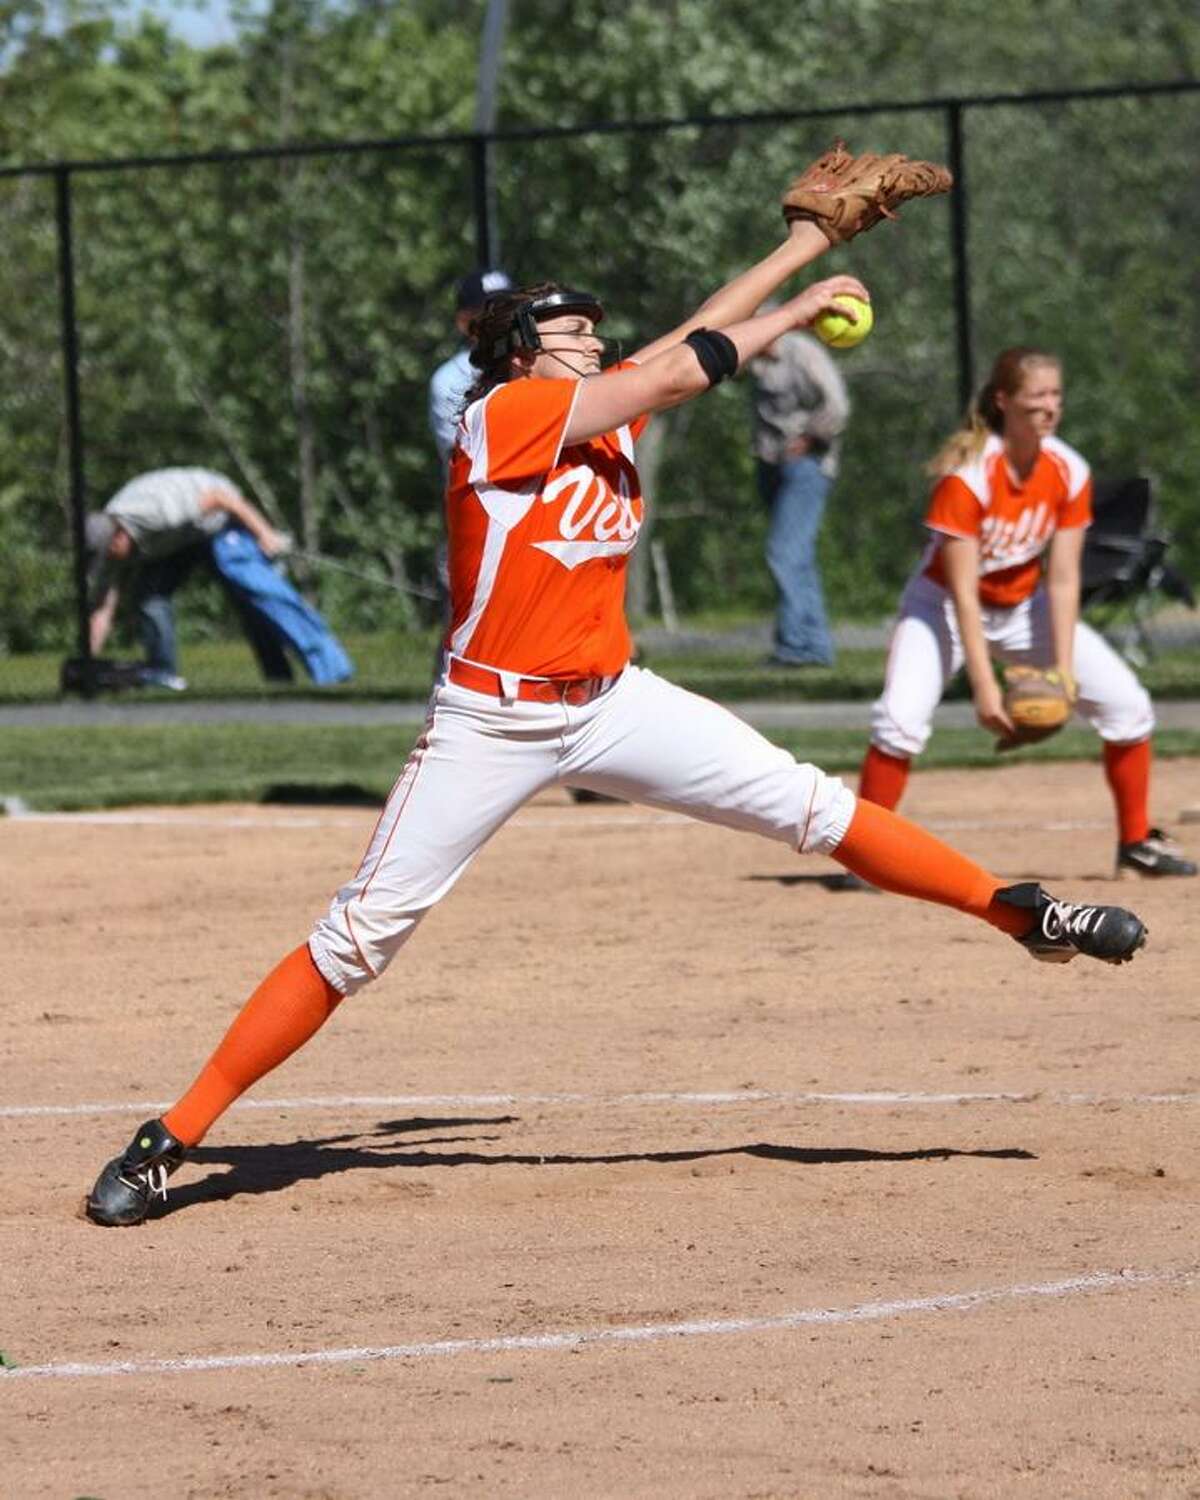 MARIANNE KILLACKEY/Register Citizen Correspondent Terryville's Jaime Bridge delivers a pitch during the Kangaroos' 4-1 win over East Granby in Terryville on Thursday.